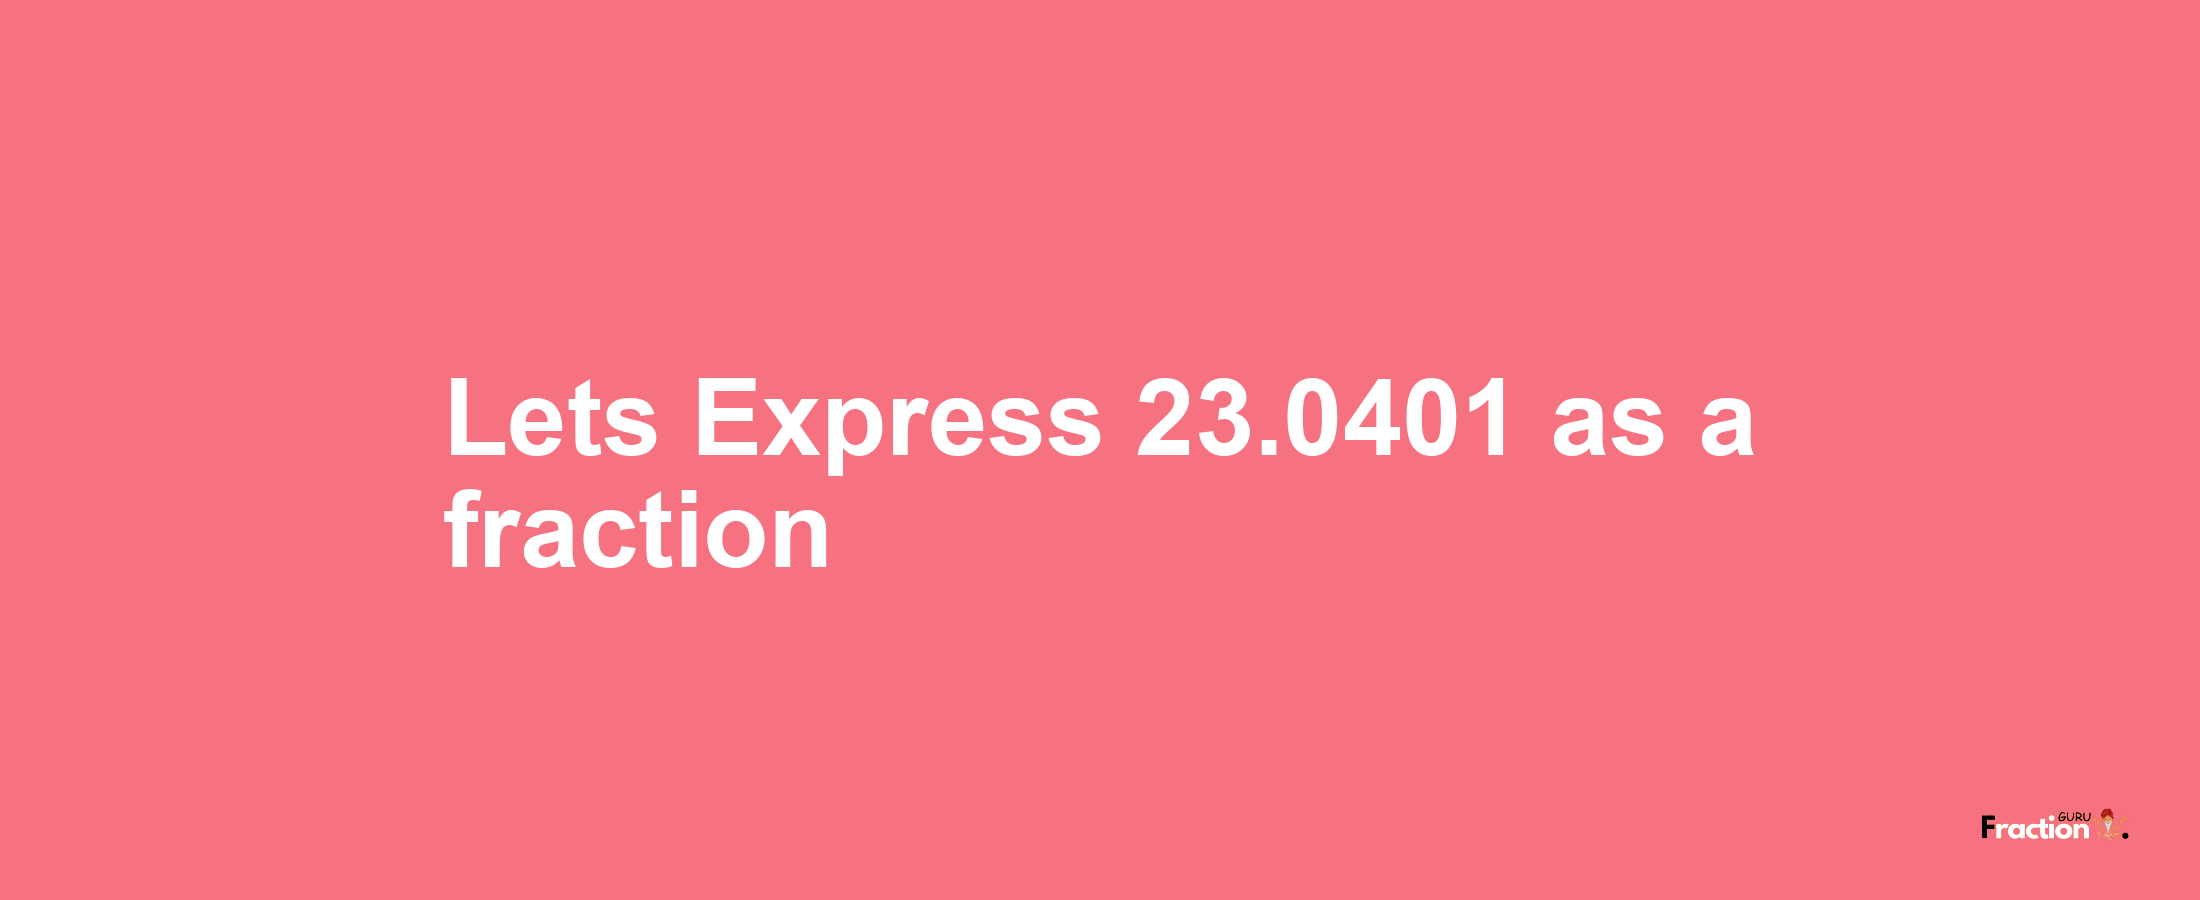 Lets Express 23.0401 as afraction